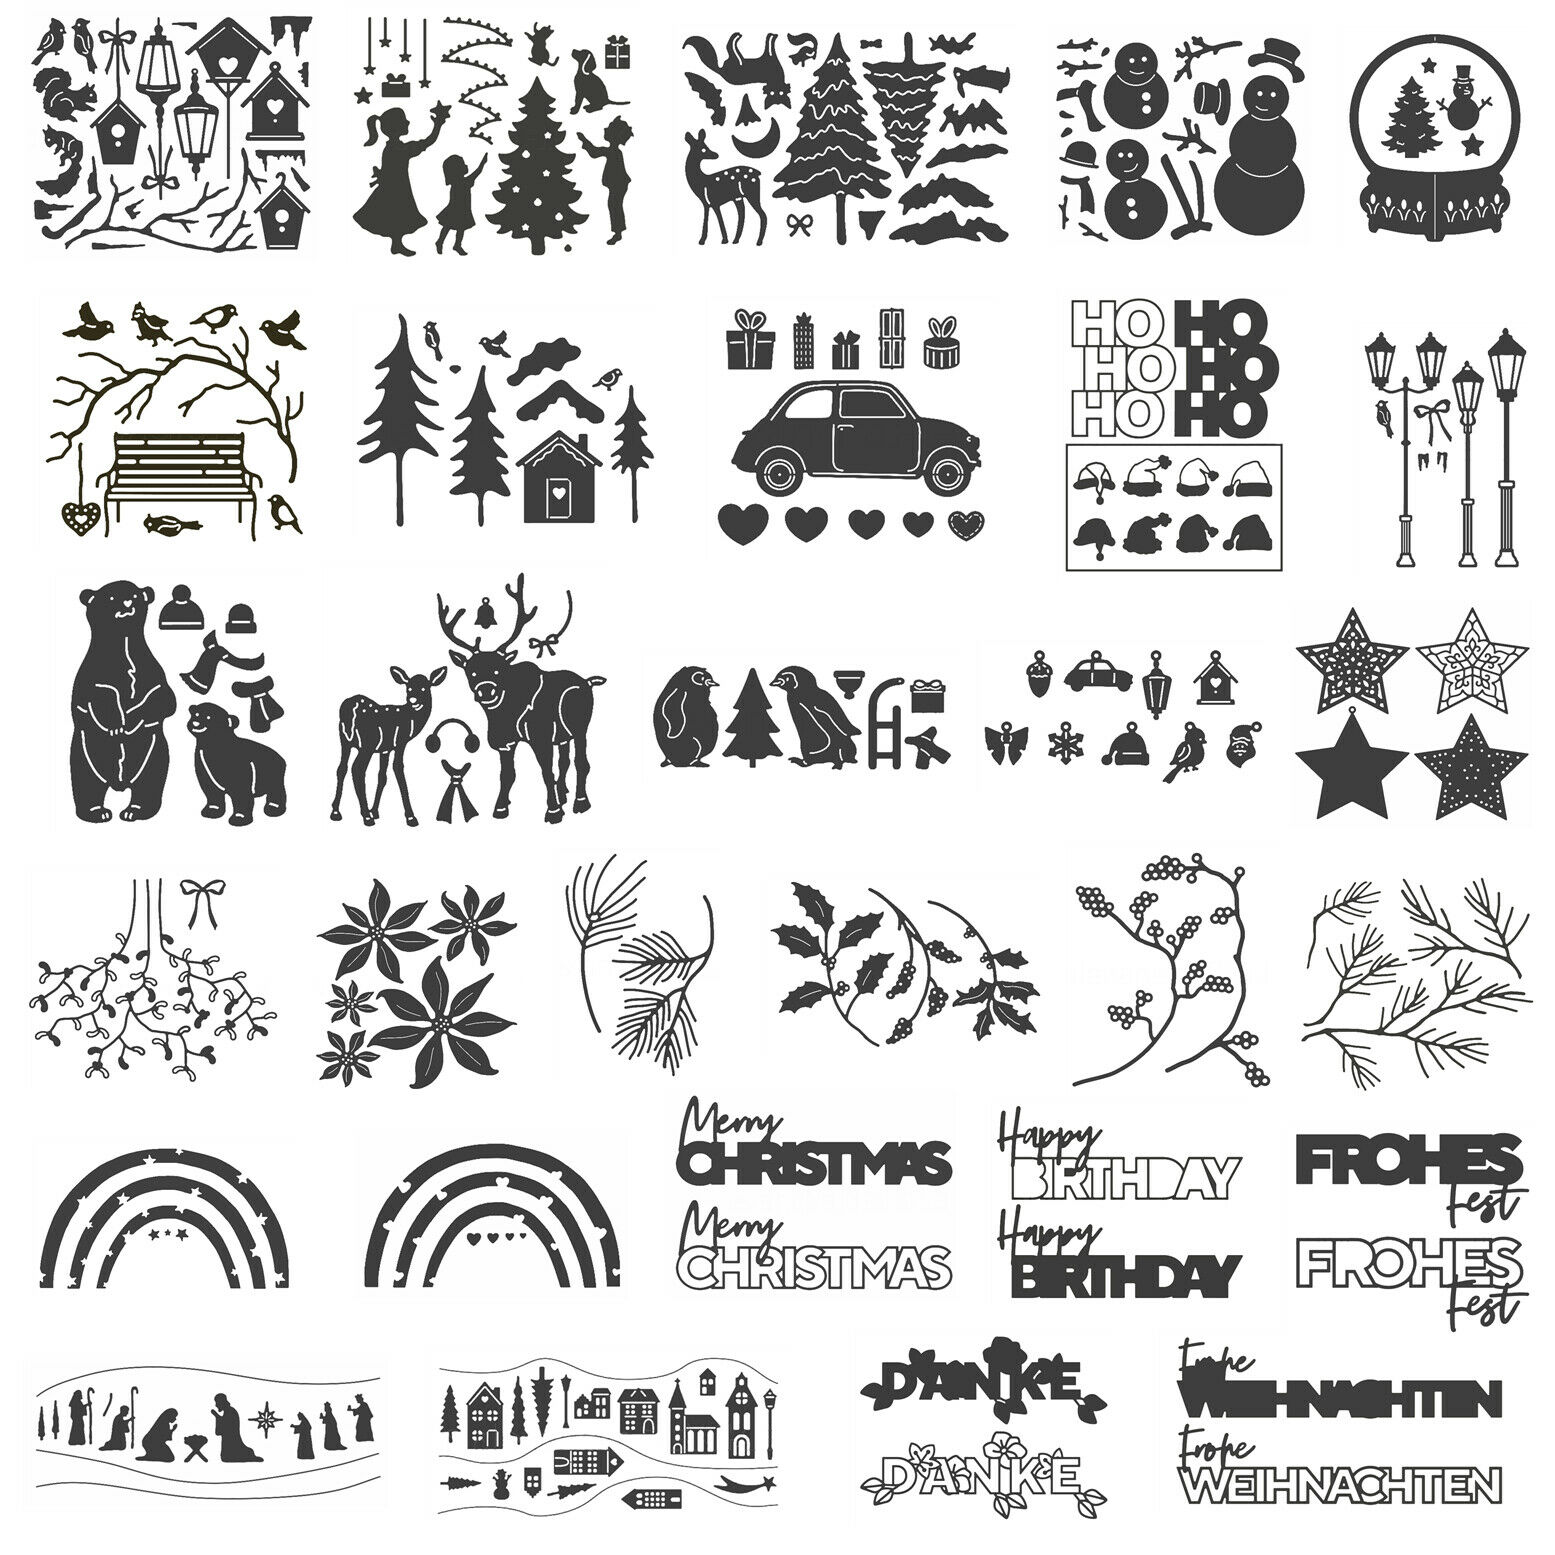 Christmas Forest Animals Metal Cutting Dies Stencil Diy Scrapbooking Paper Cards